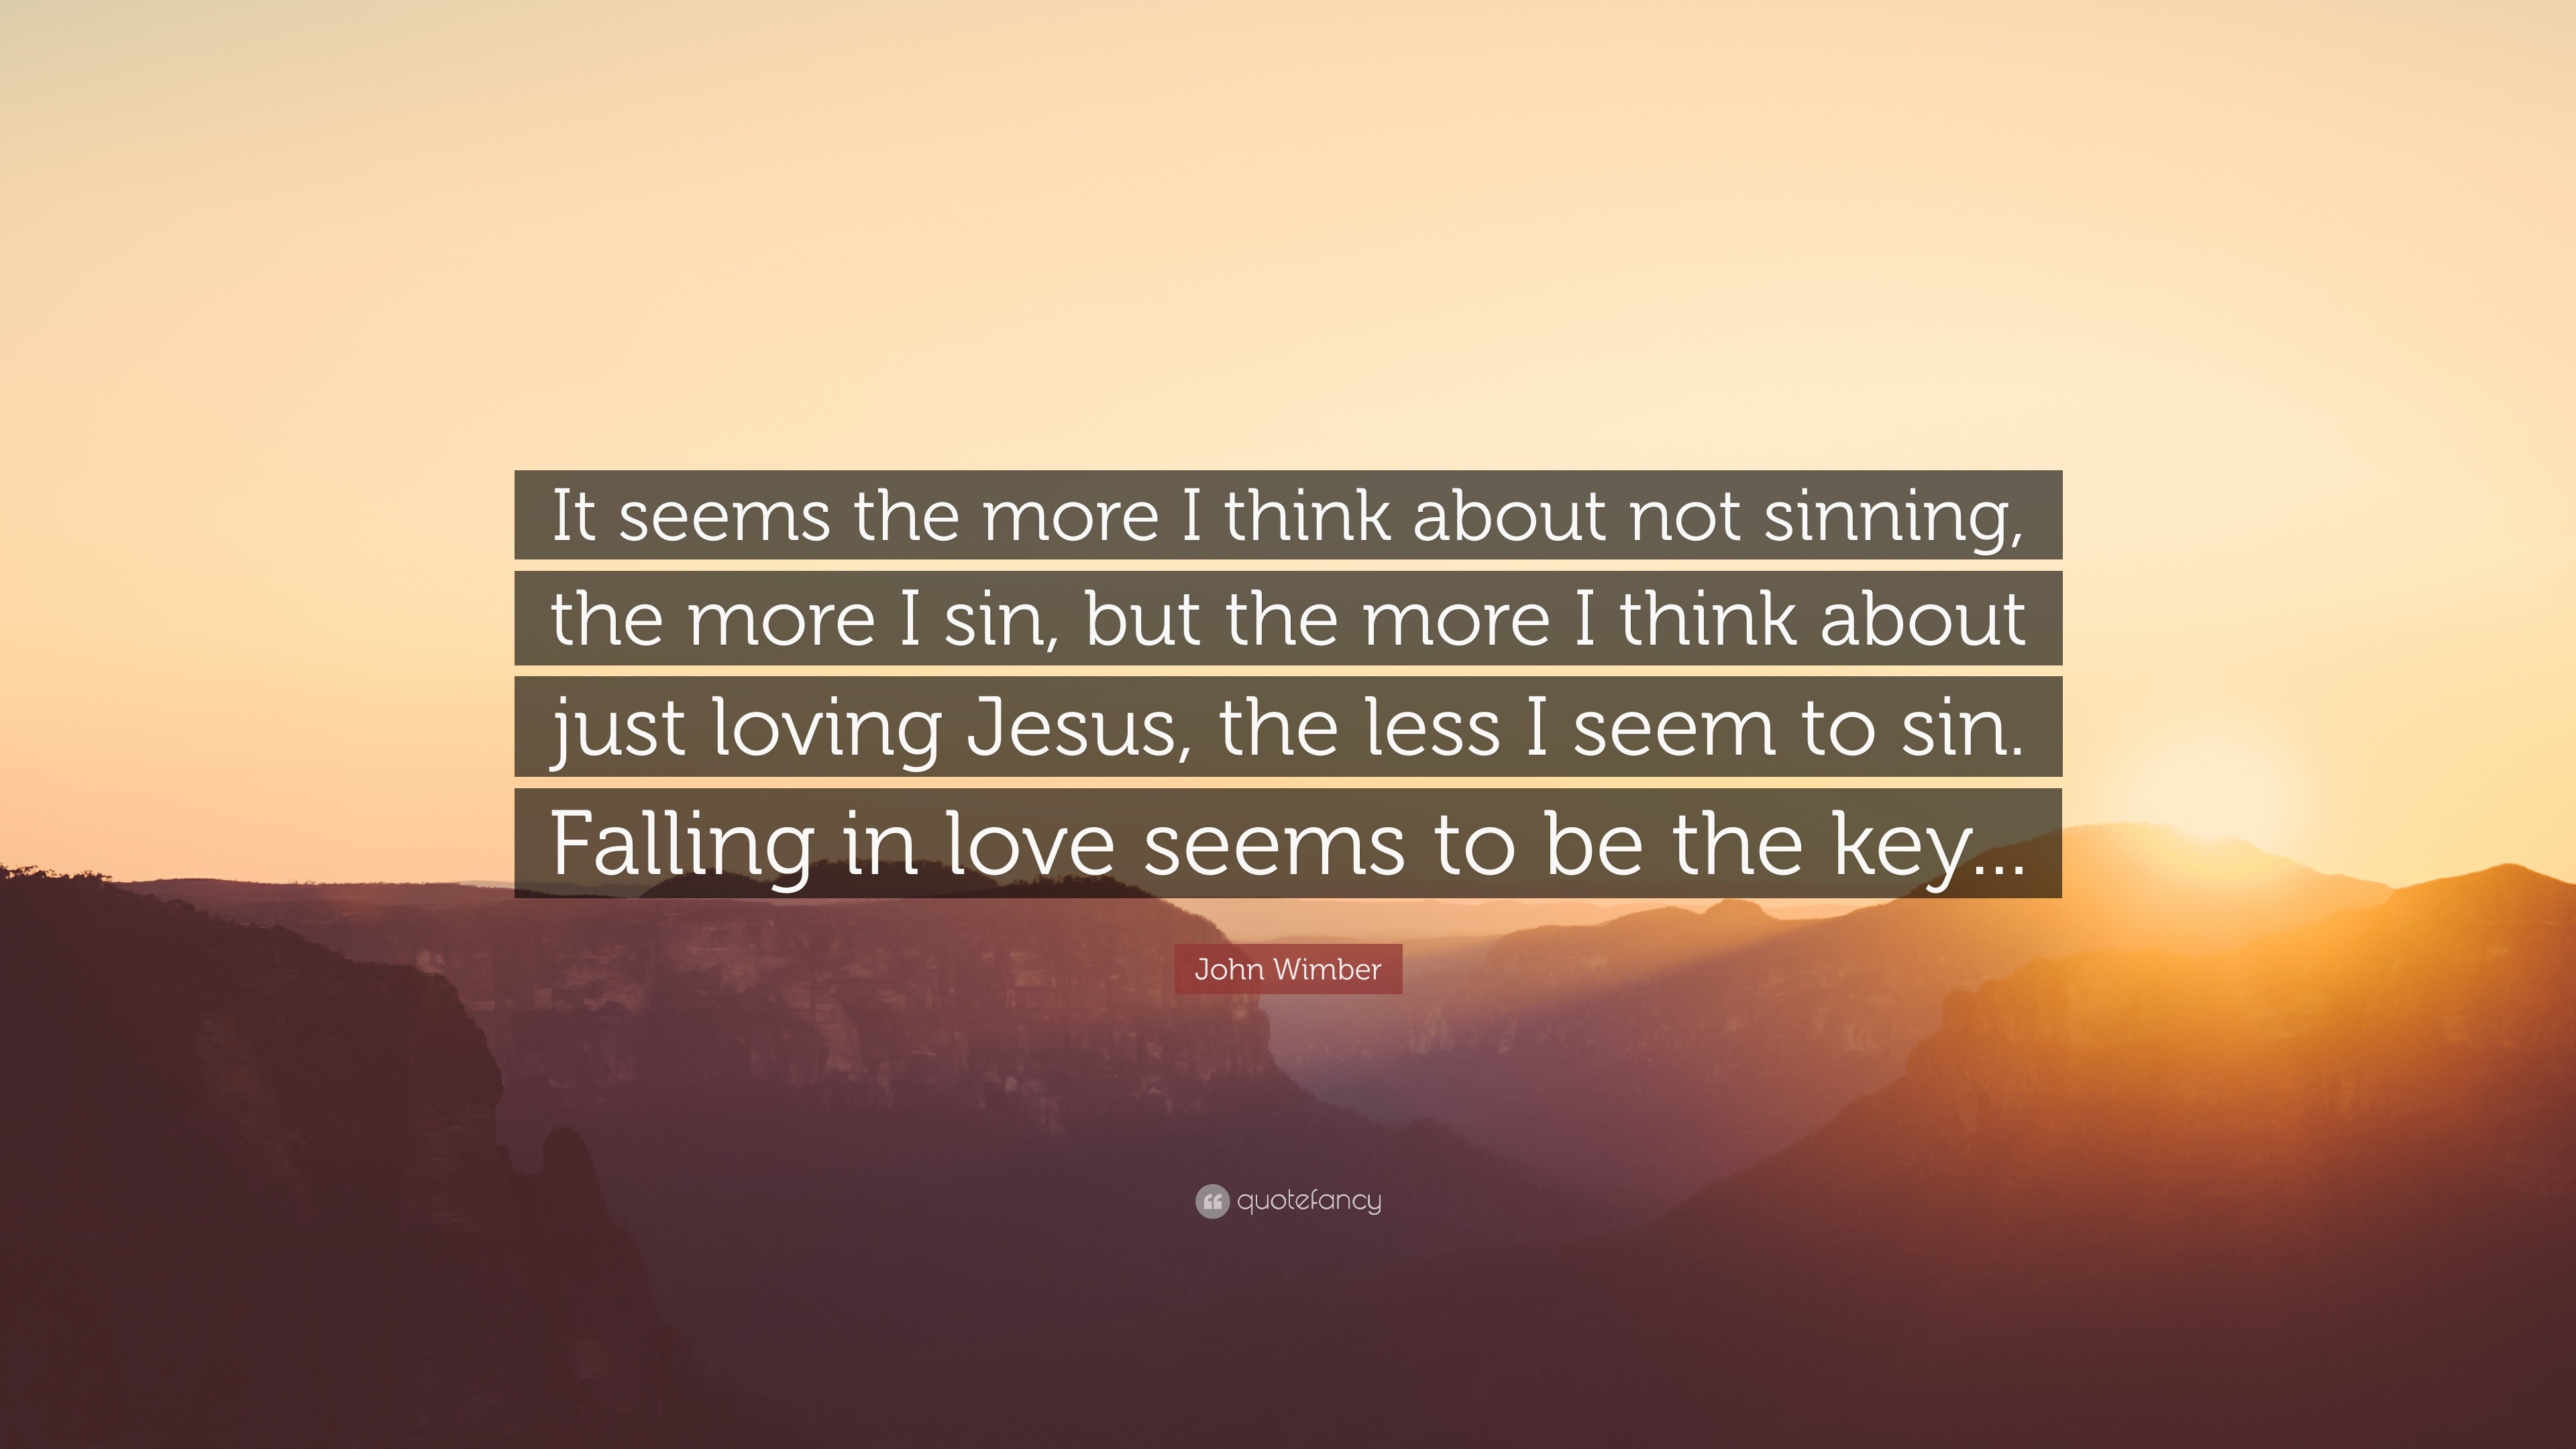 John Wimber Quote: “It seems the more I think about not sinning